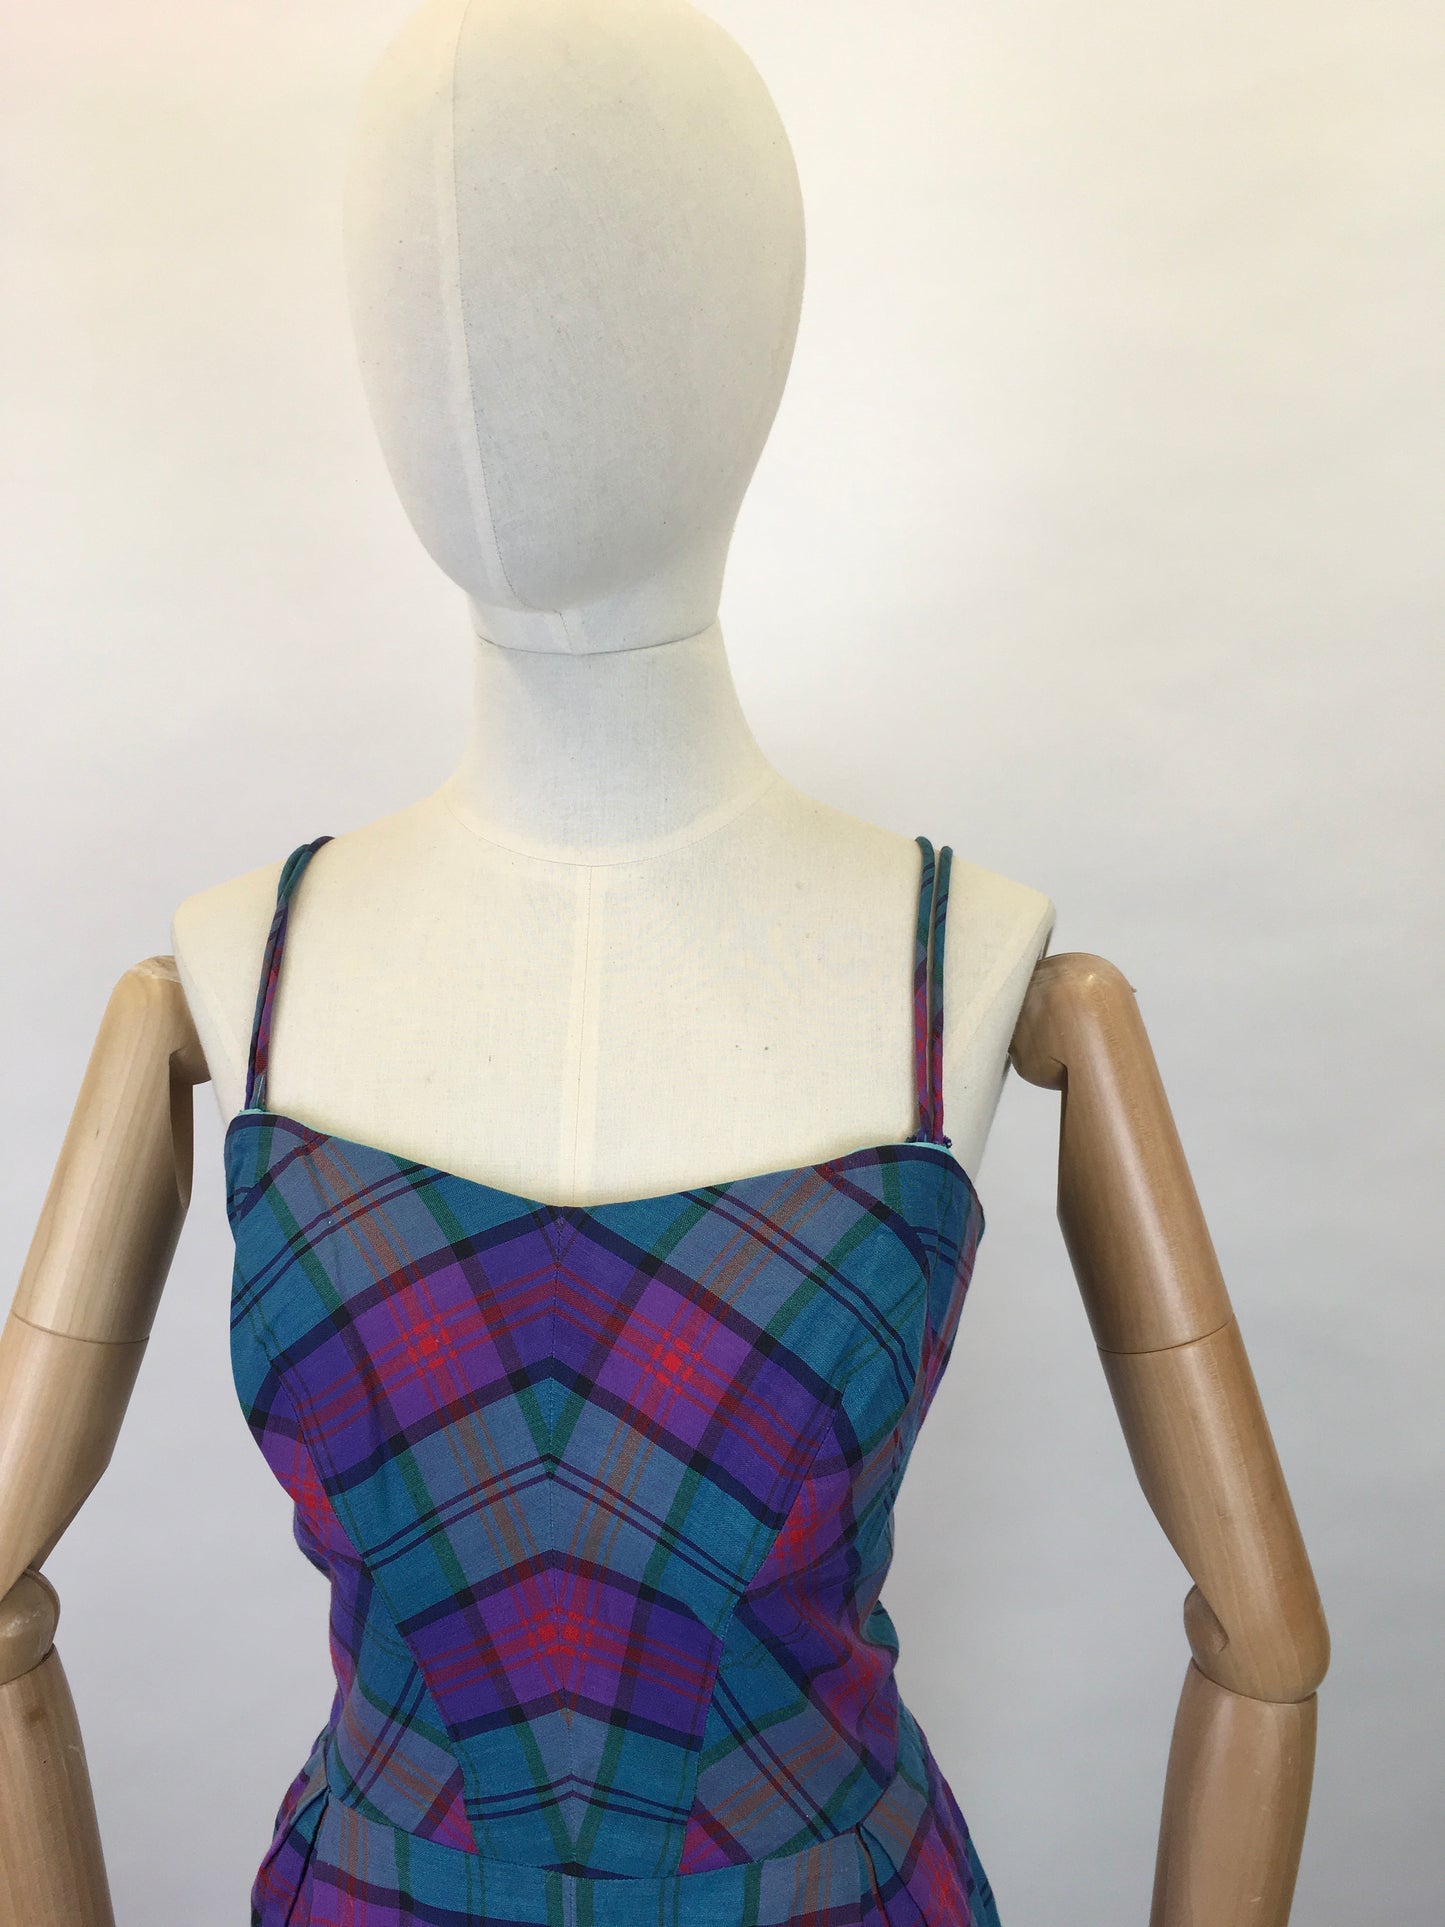 Original 1950s Fabulous Summer Playsuit - In a Gorgeous Plaid With Rich Purple, Reds, Blues and Bottle Greens